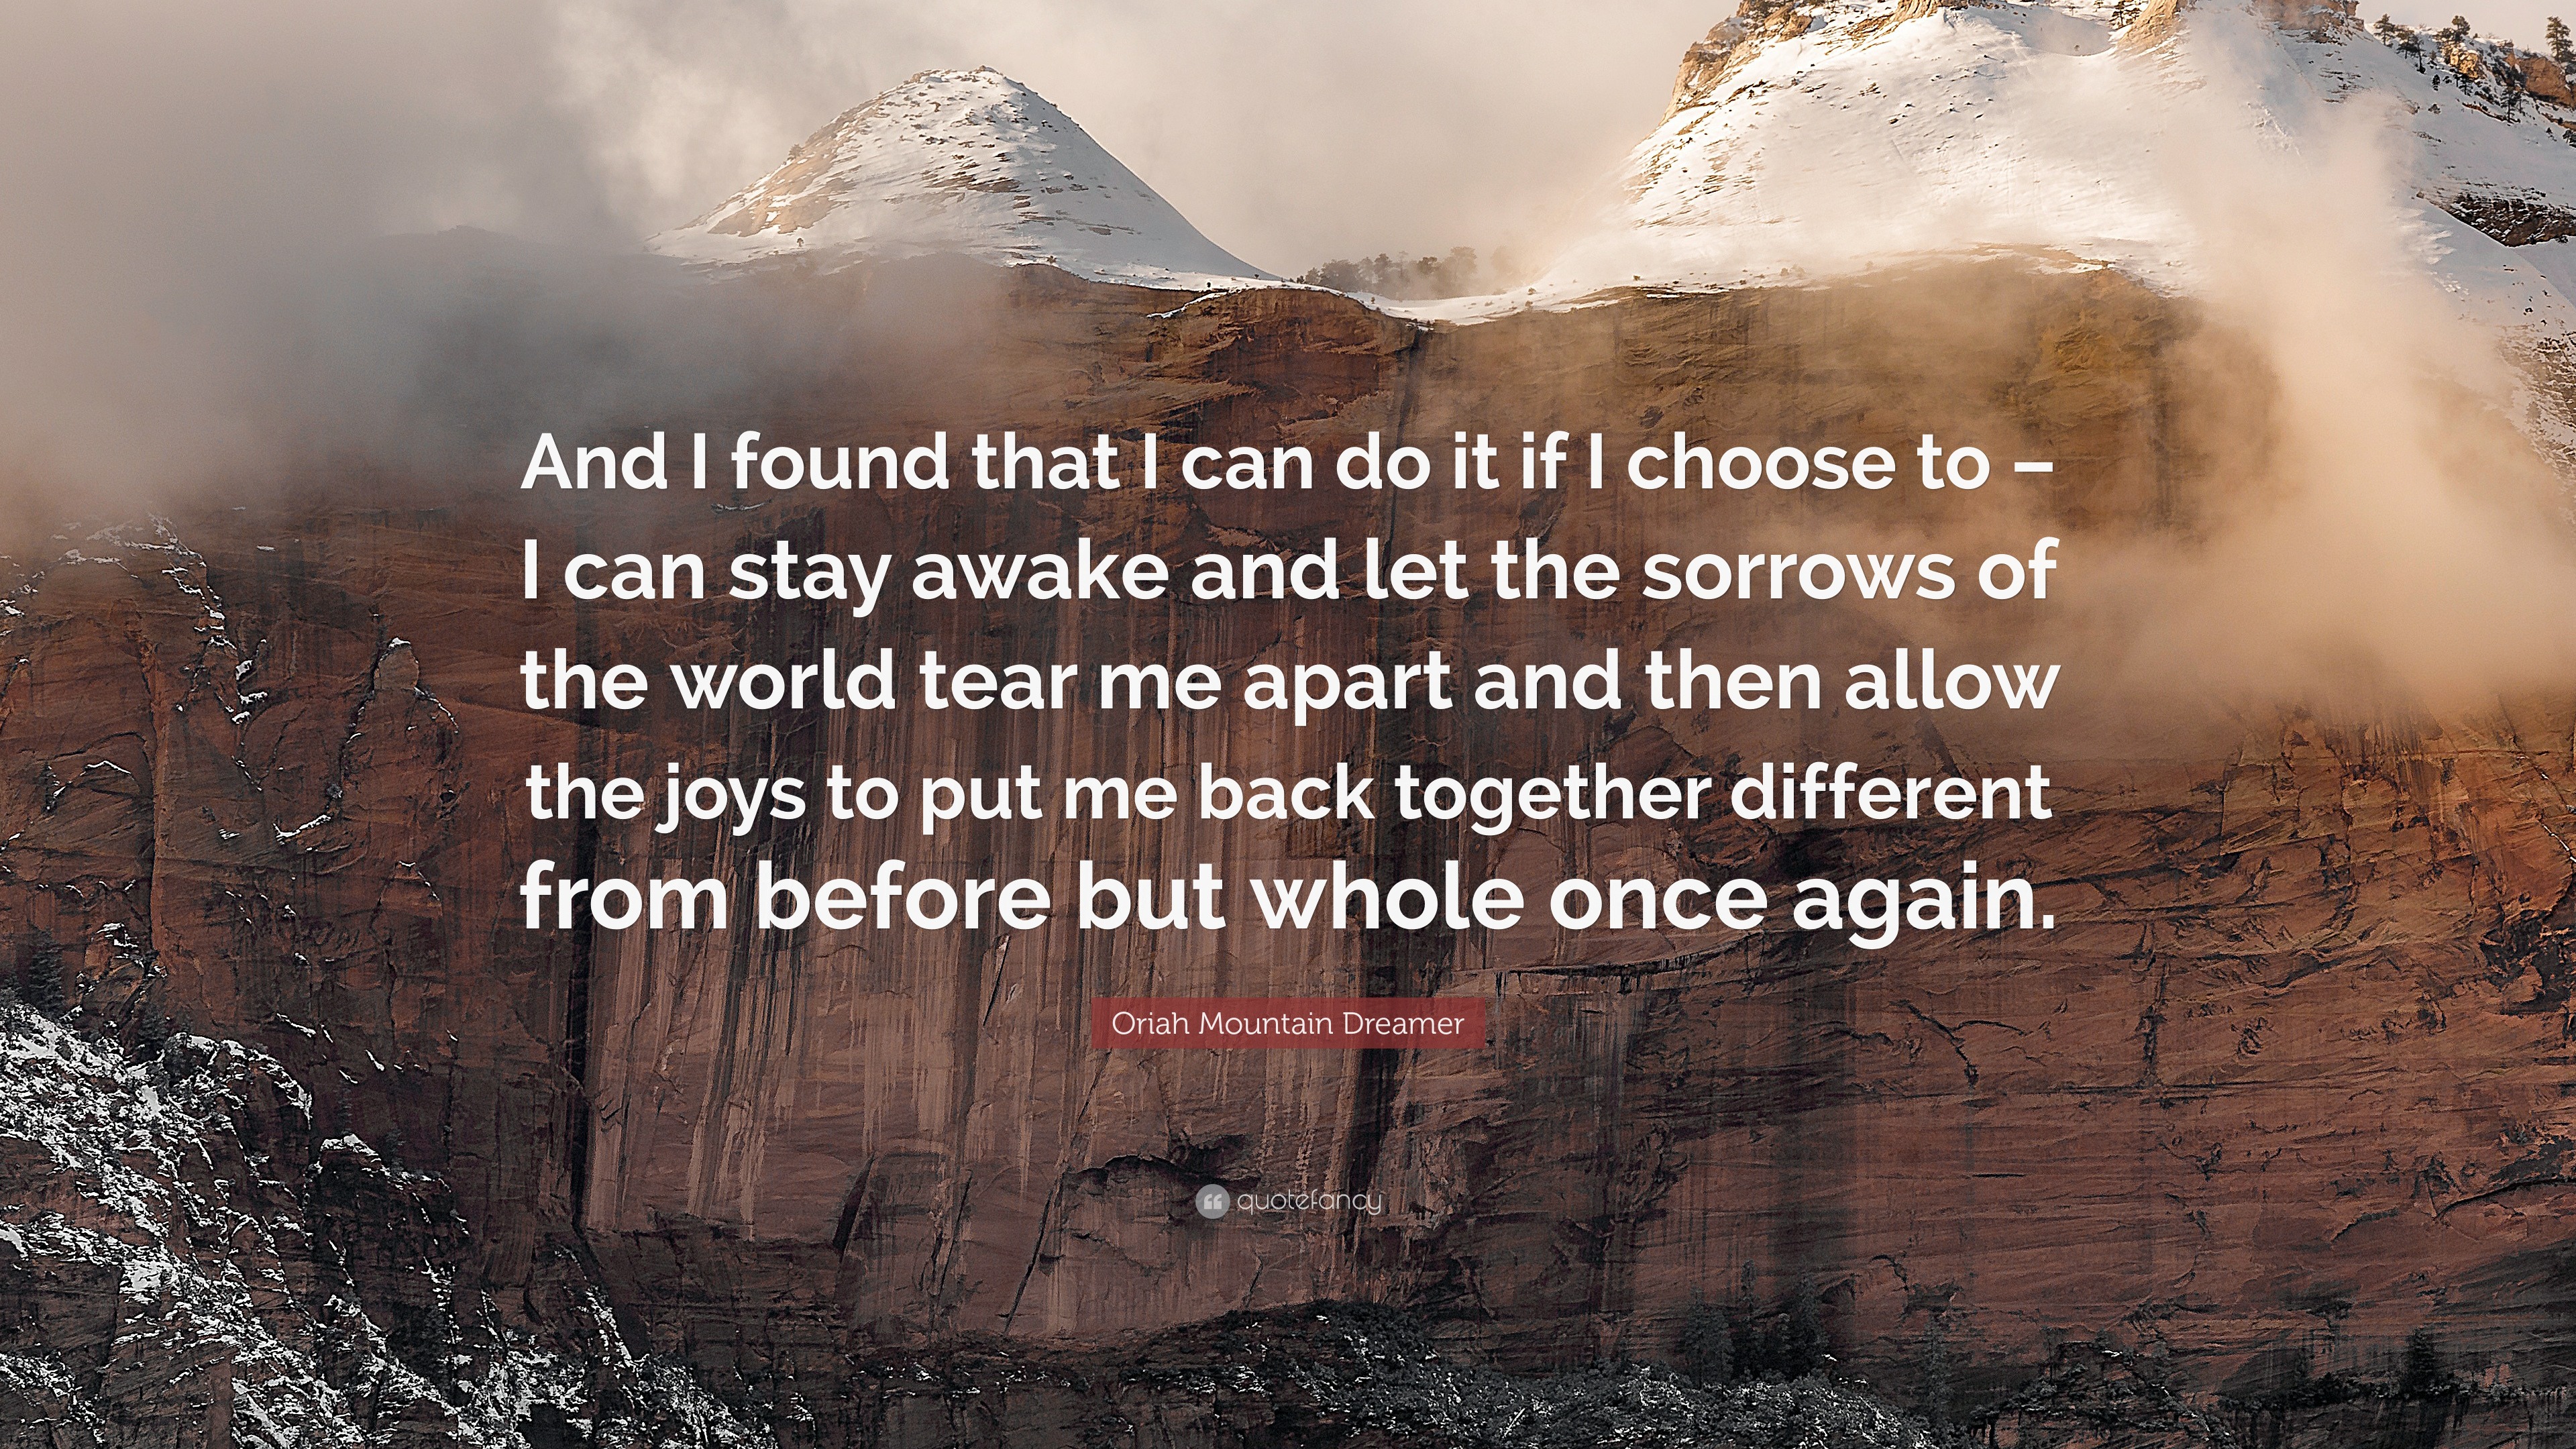 Oriah Mountain Dreamer Quote: “And I found that I can do it if I choose